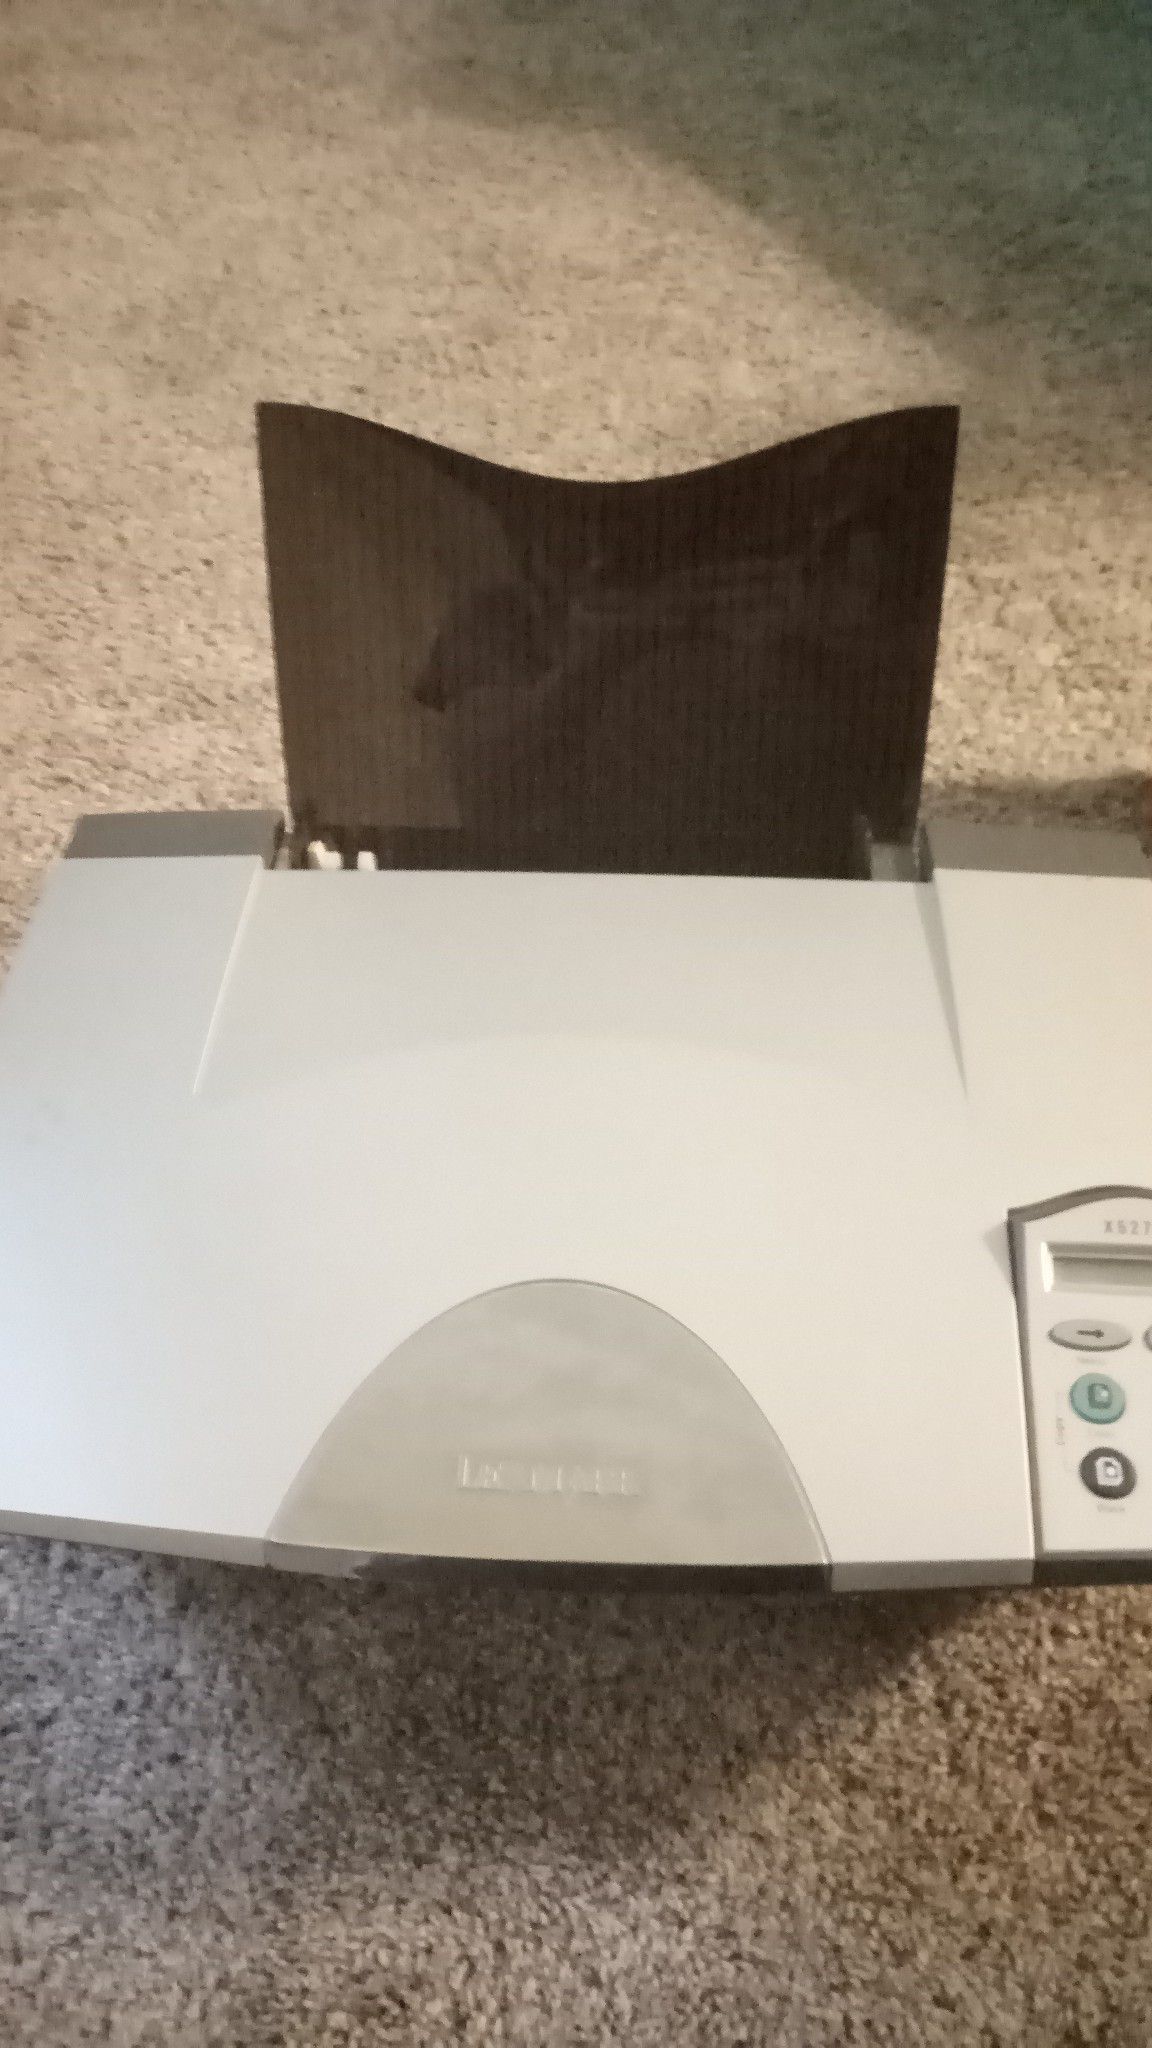 Lexmark X5270 All-in-One Printer/Scanner/Copier only 10$ excellent condition!